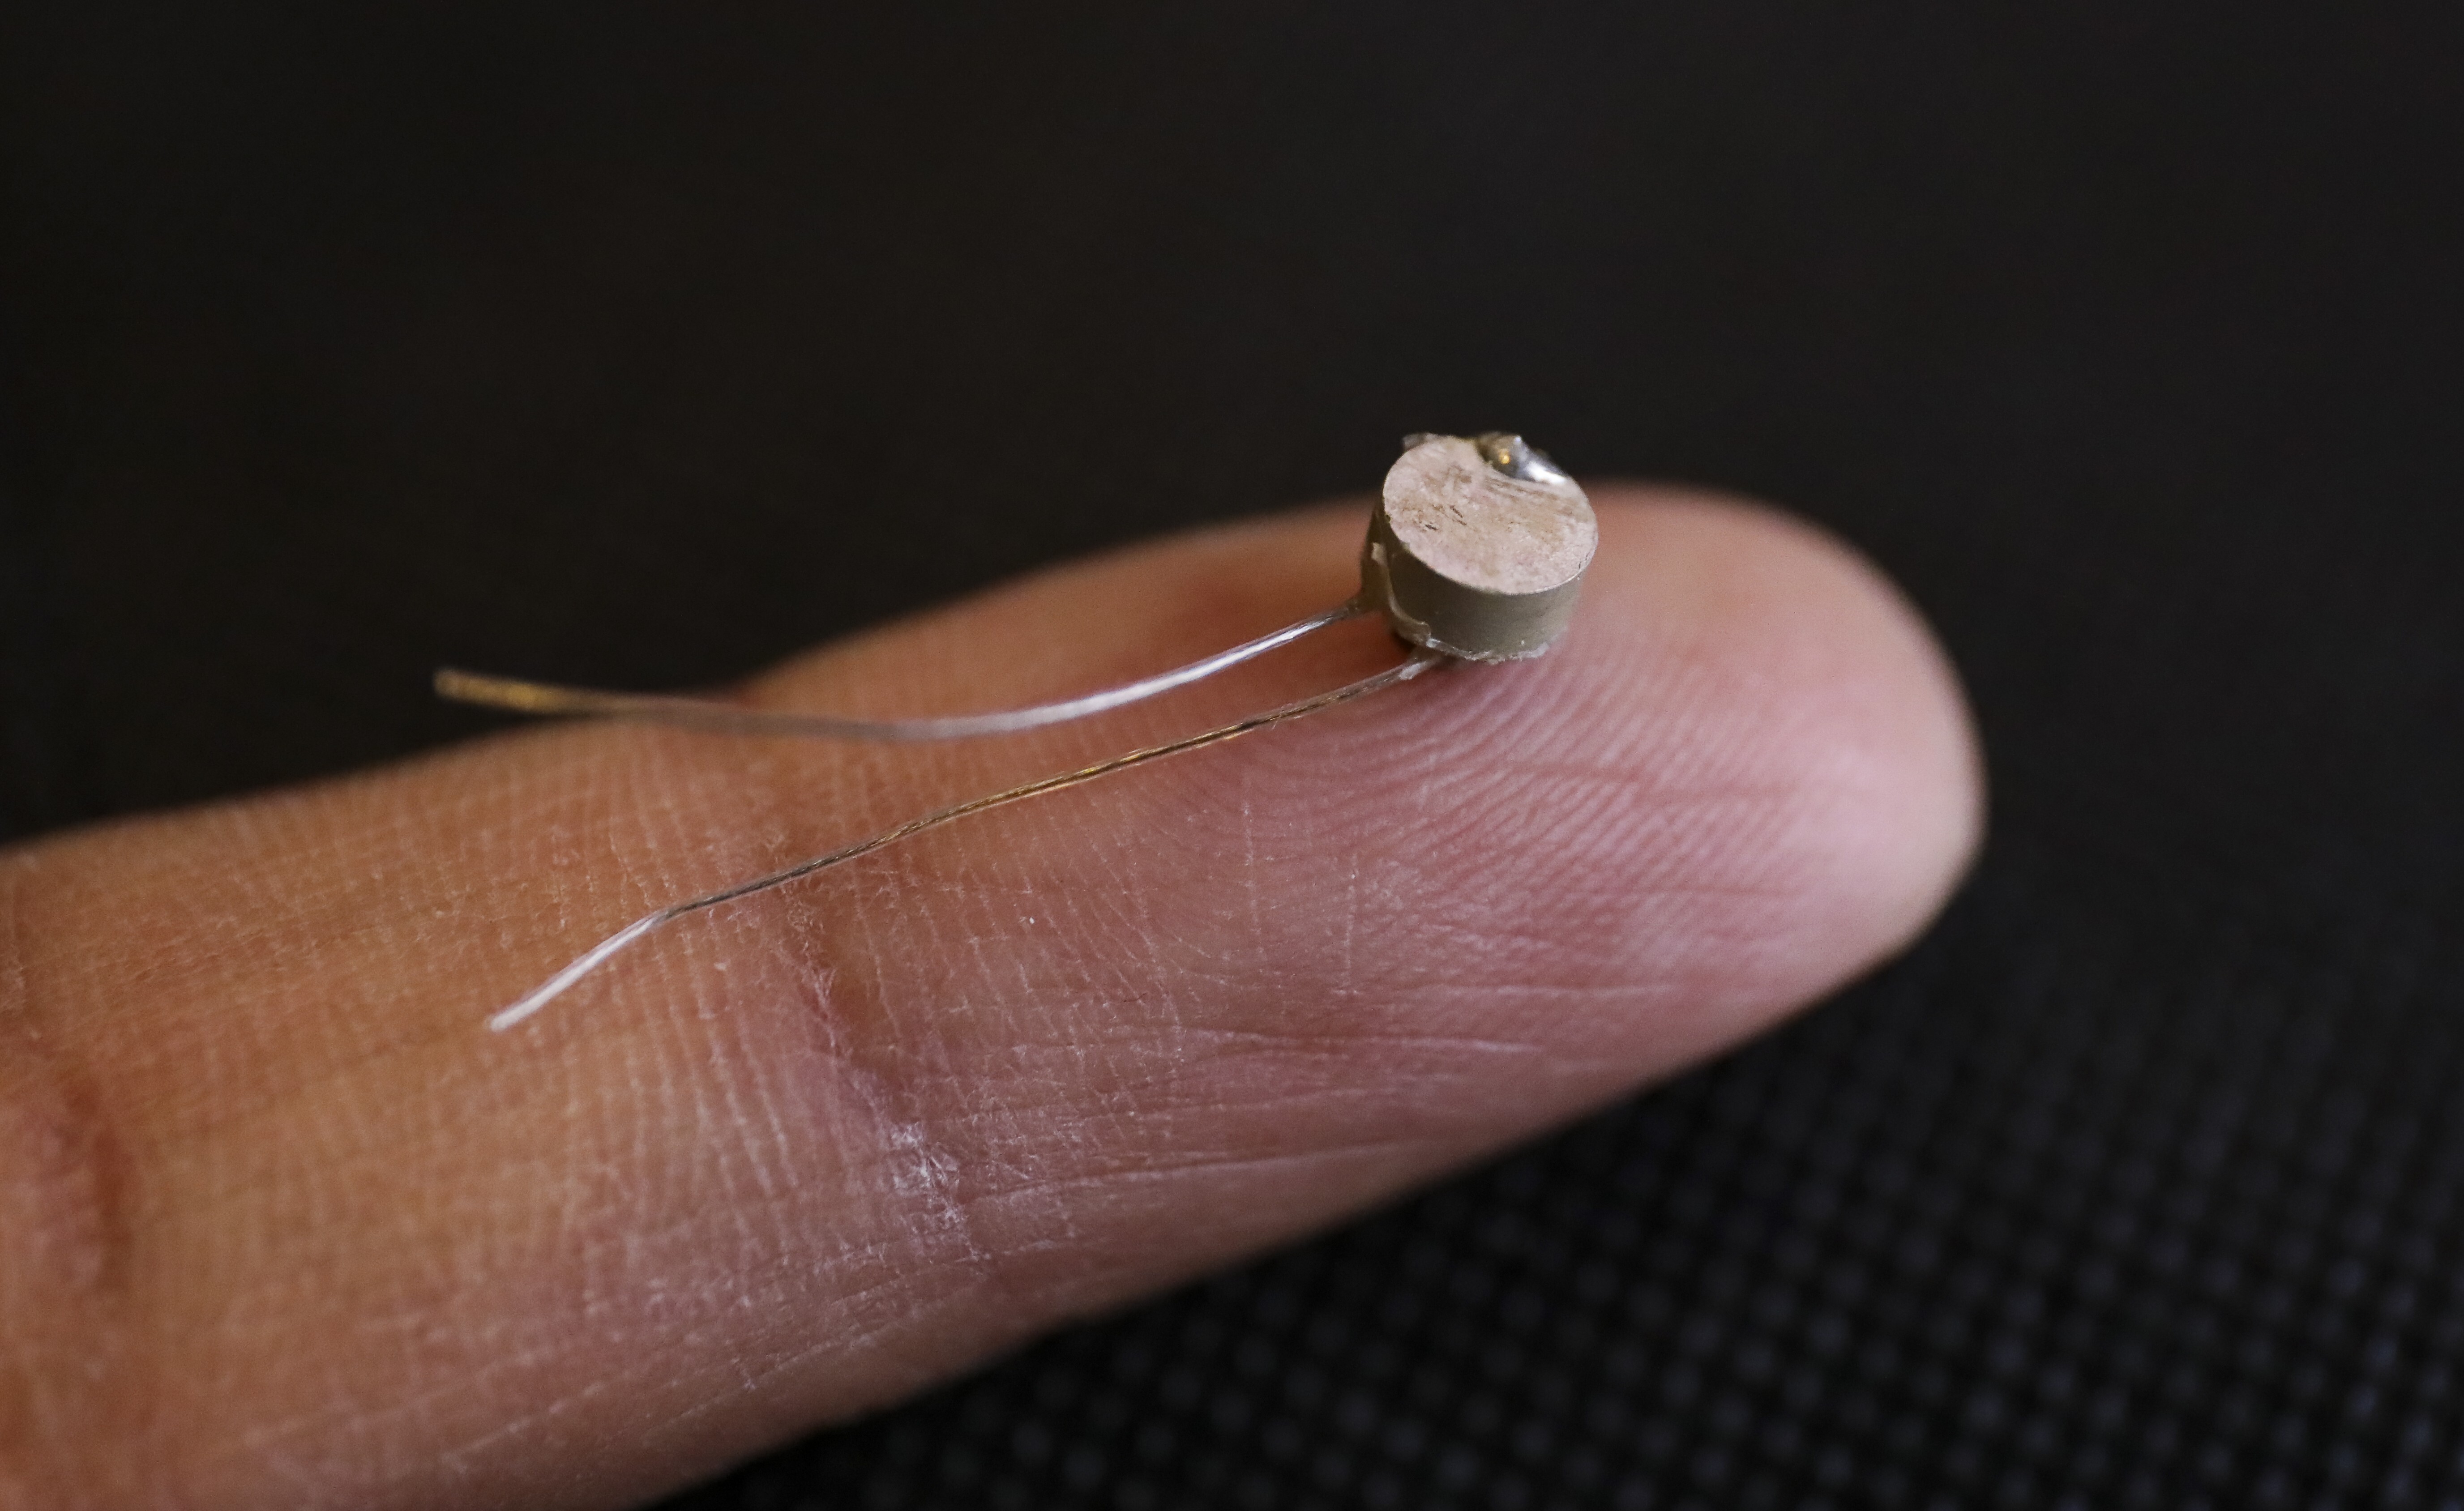 A tiny neurostimulator developed by Polytechnic University researchers could help patients with spinal injuries avoid invasive surgeries. Photo: K. Y. Cheng